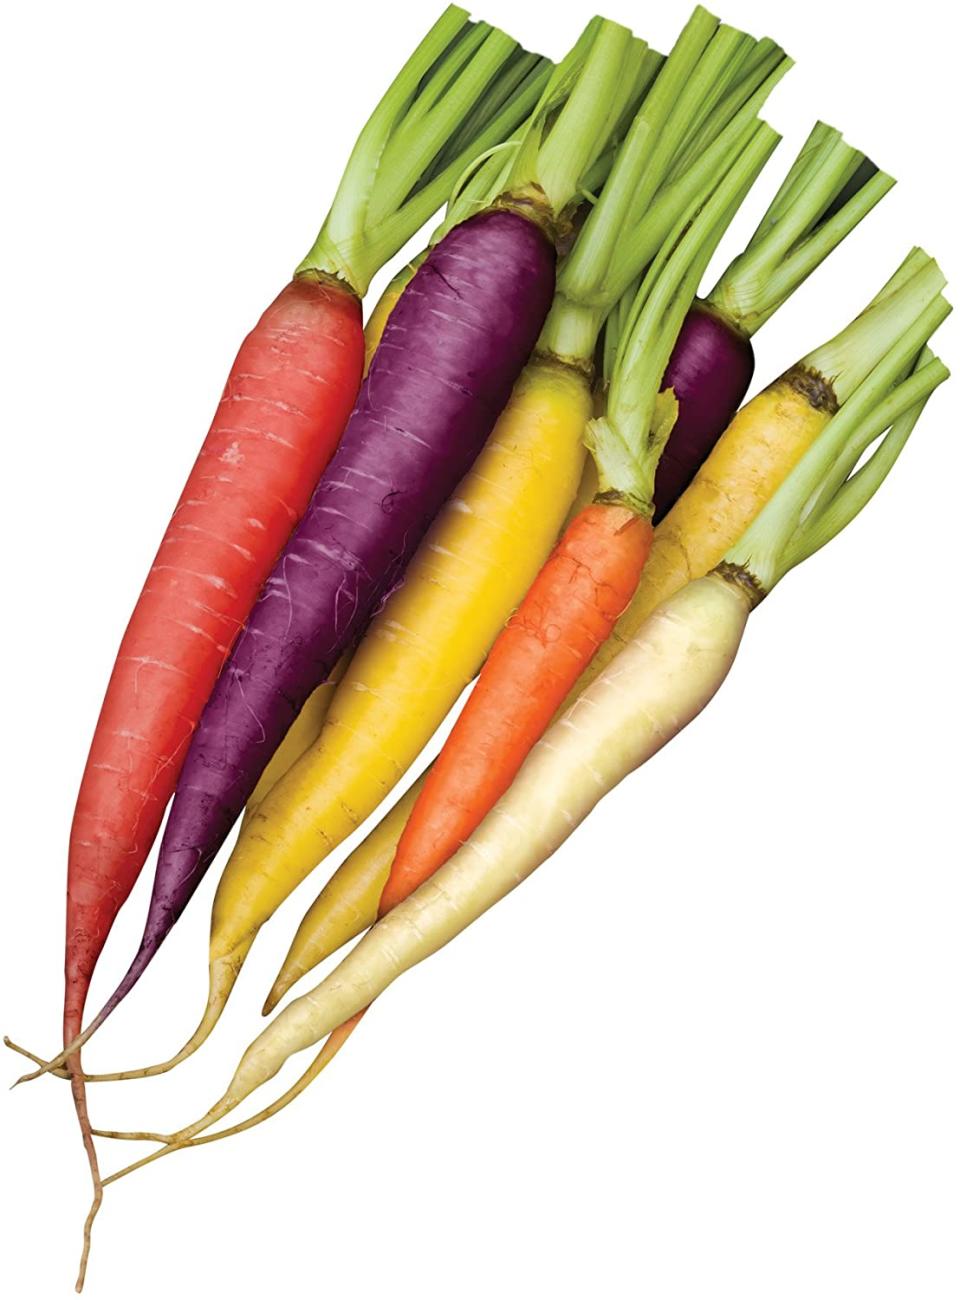 Carrots of all colors.